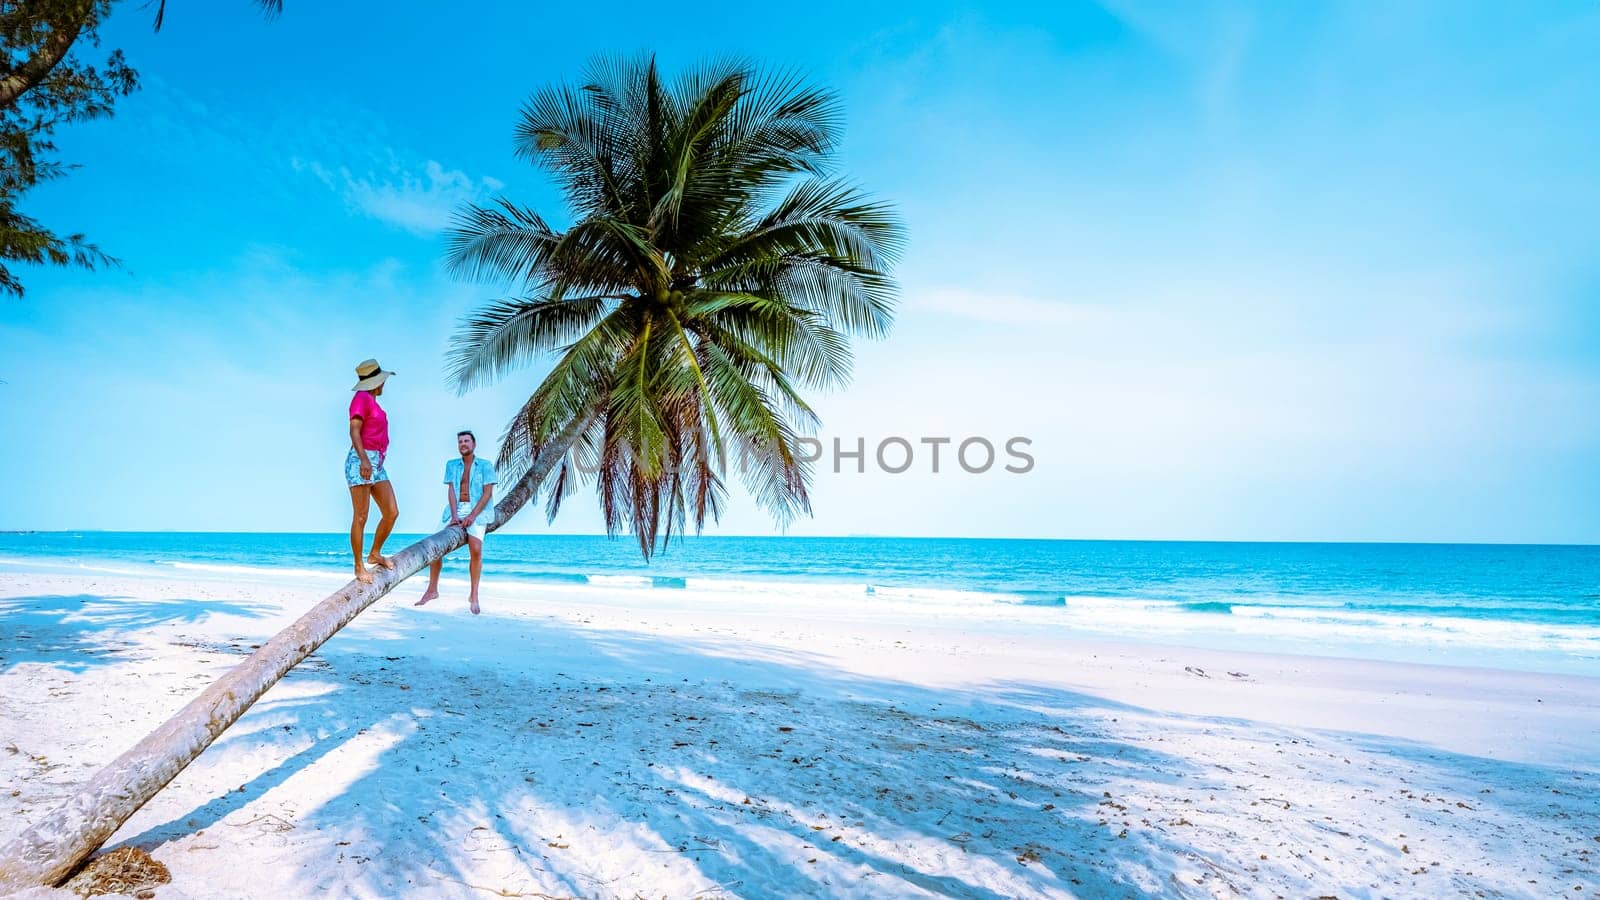 A couple climbing in a palm tree in Thailand at Wua Laen beach Chumphon area Thailand, palm tree hanging over the beach with a couple of men and woman on vacation holiday in Thailand